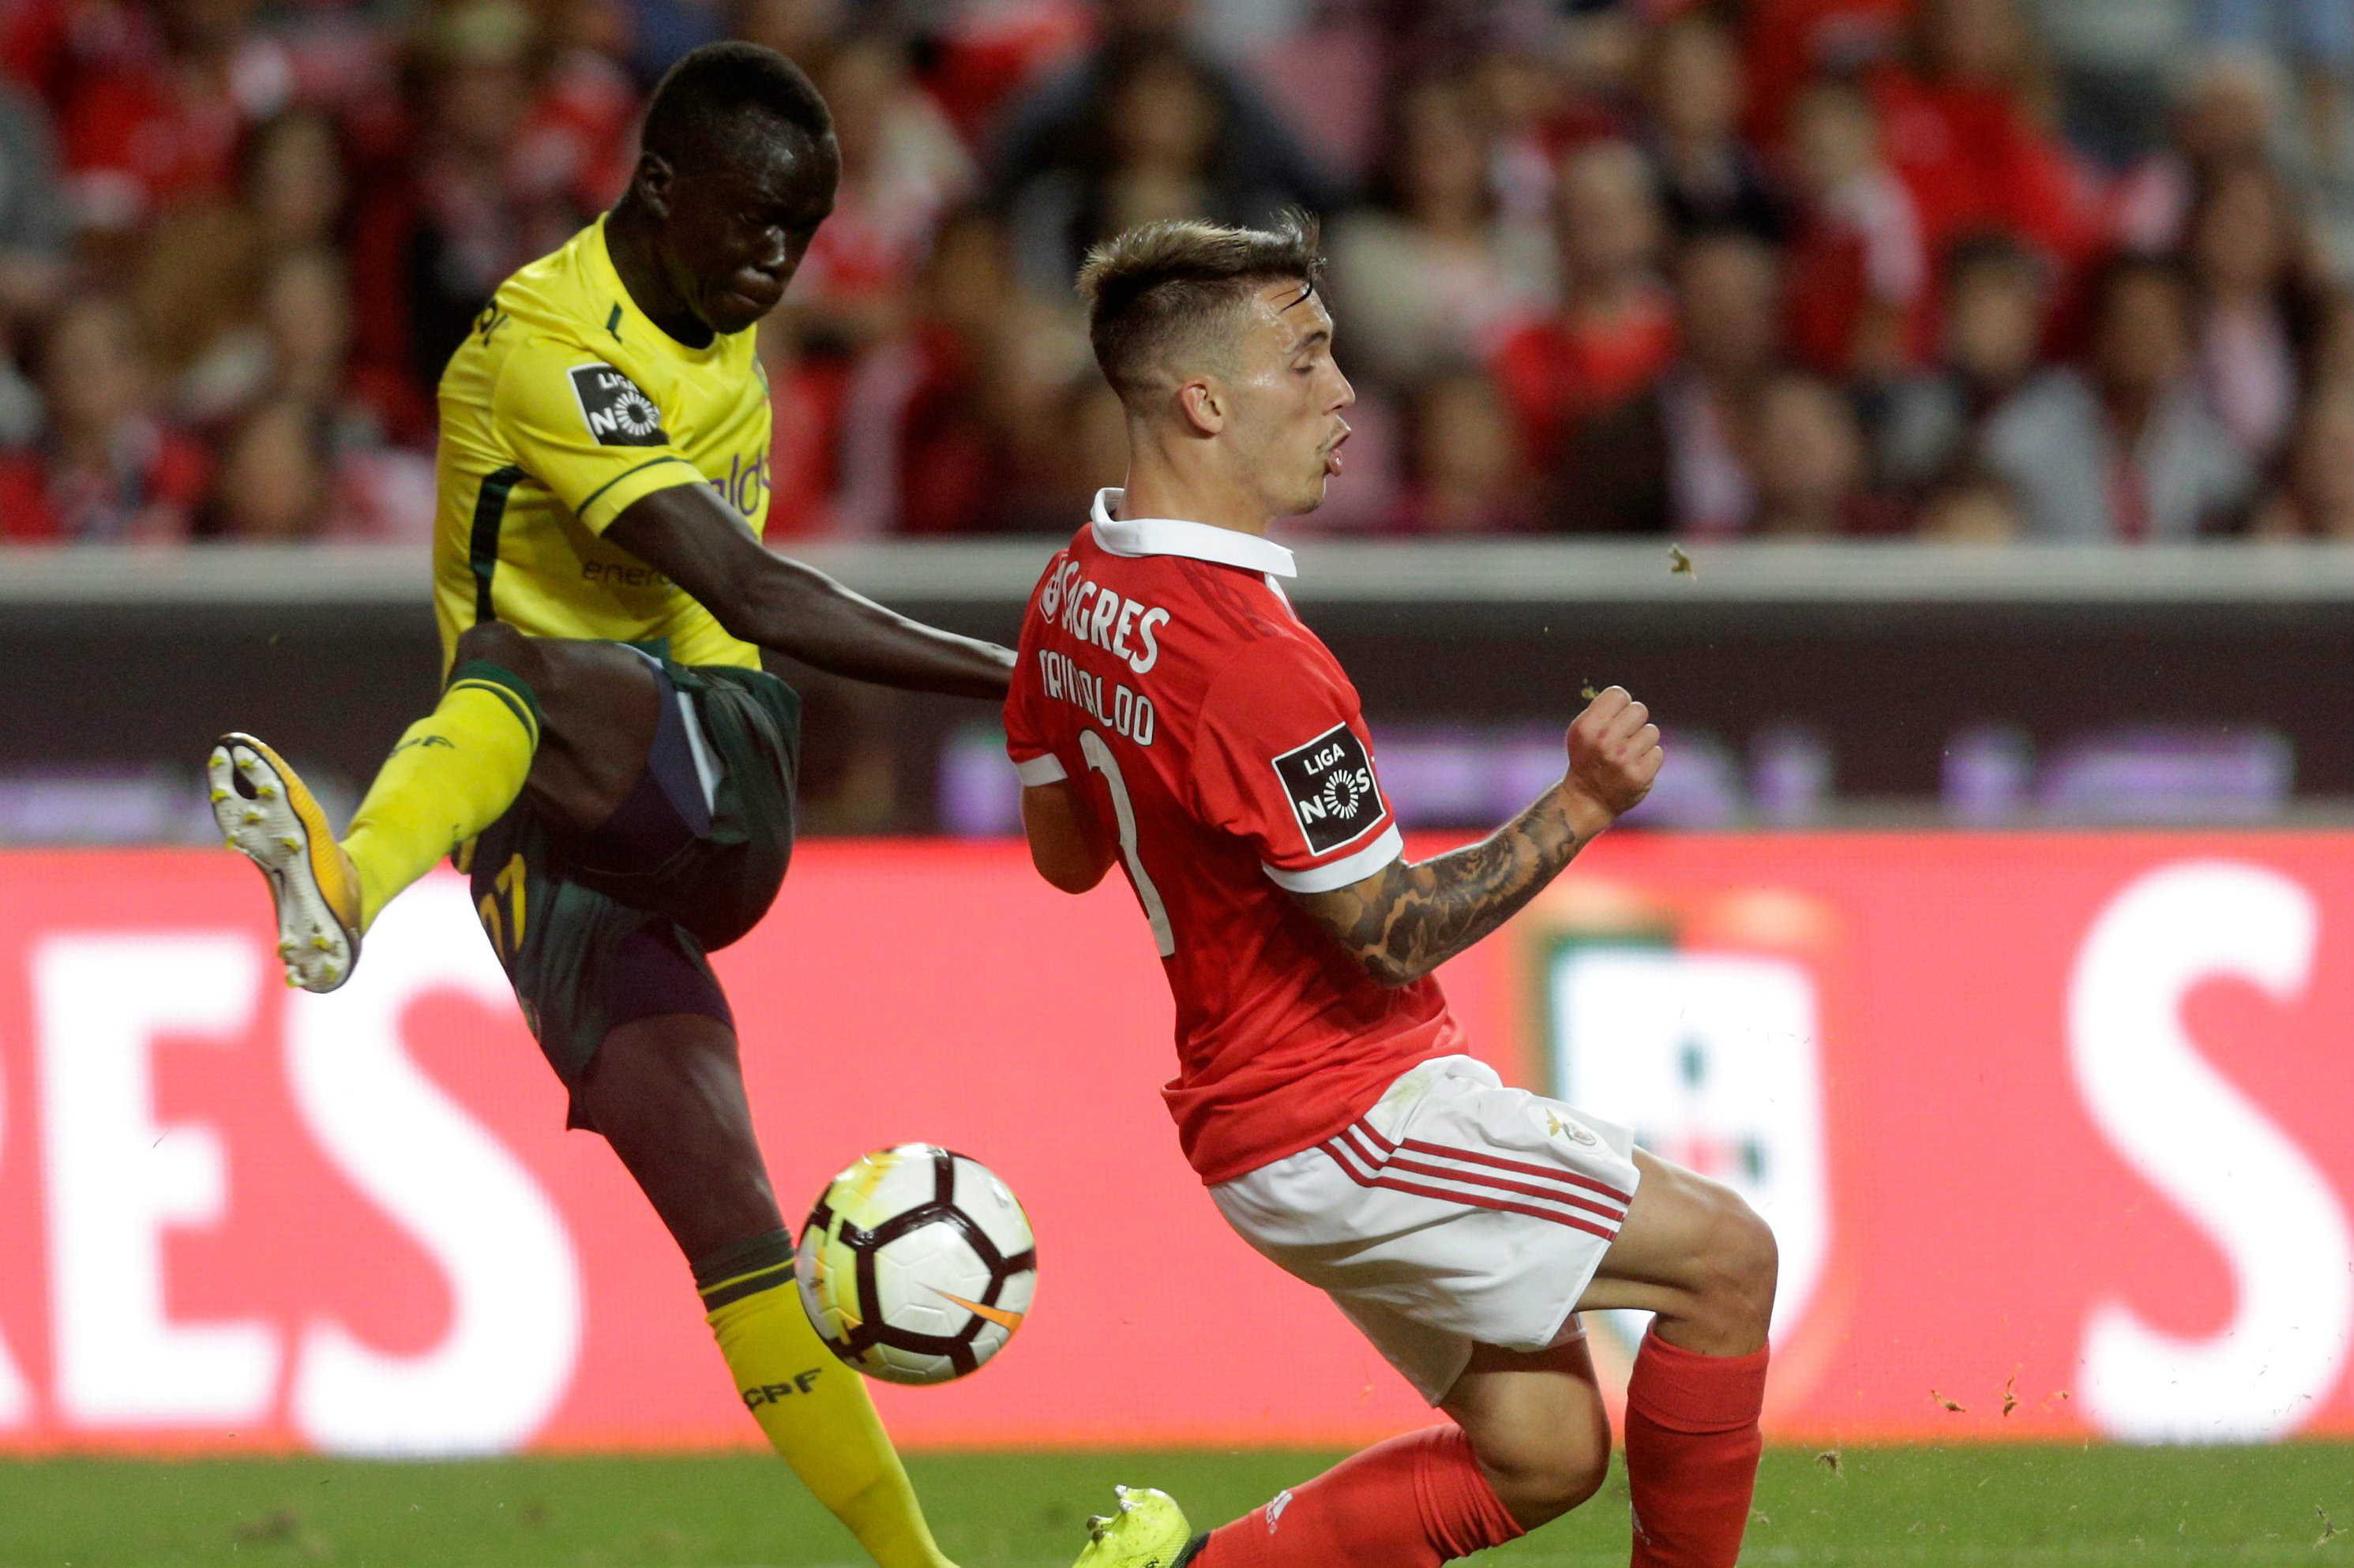 Awer Mabil in action for Pacos de Ferreira.